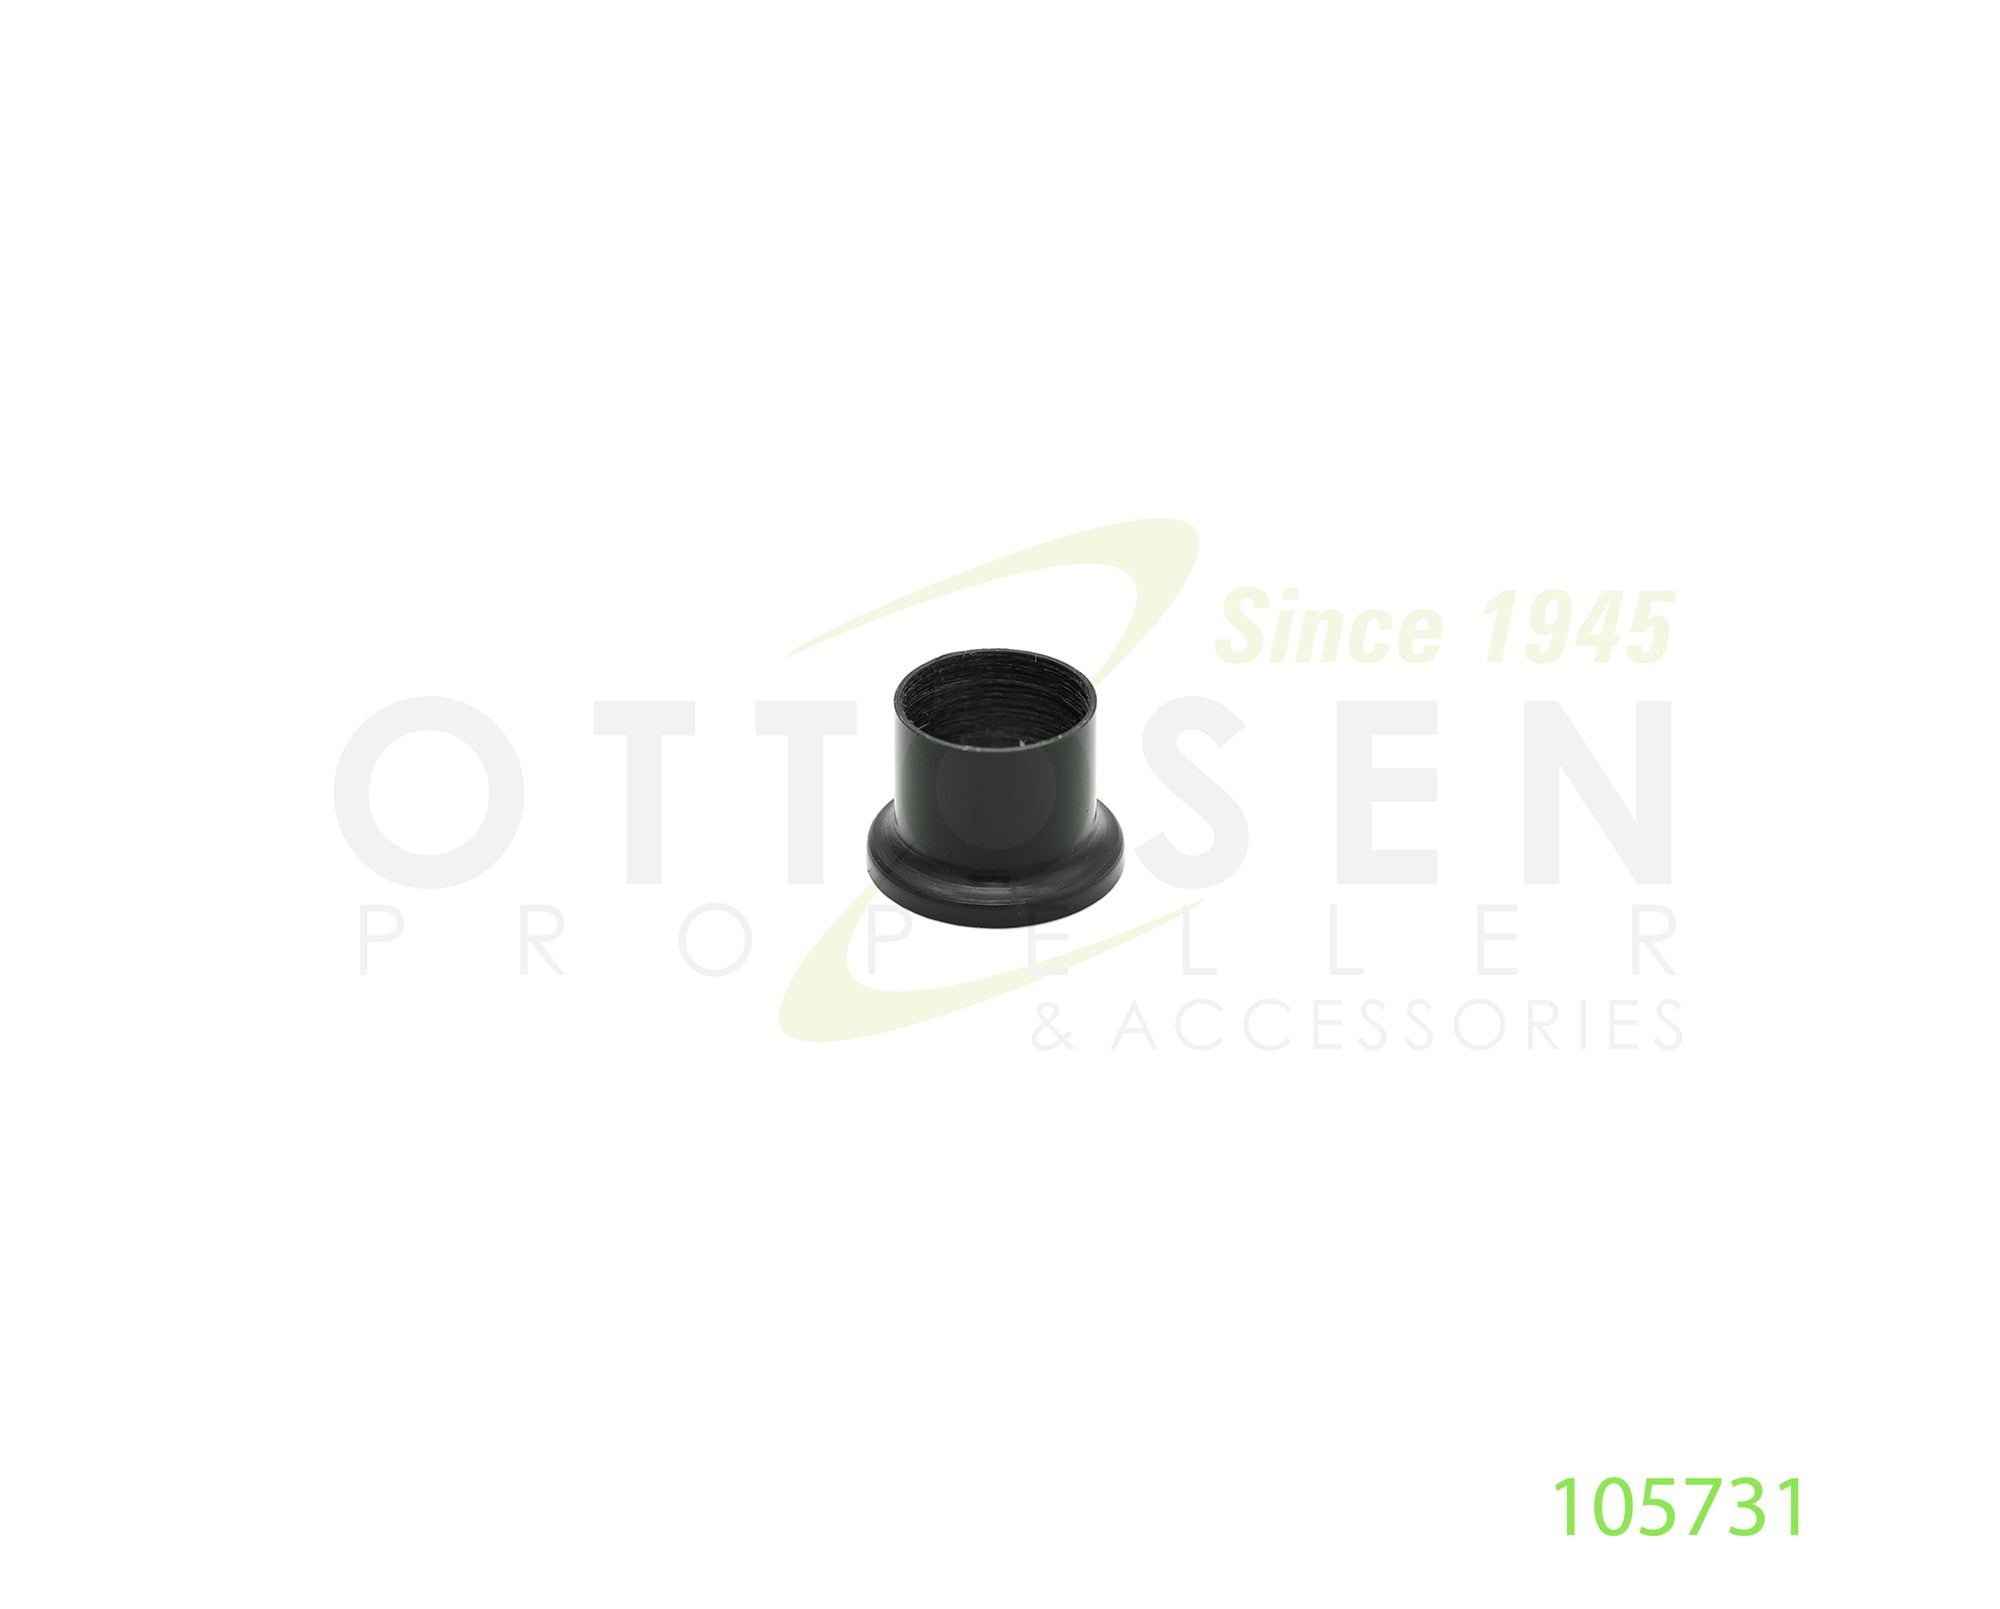 105731-HARTZELL-PROPELLER-PITCH-CHANGE-KNOB-BUSHING-PICTURE-1